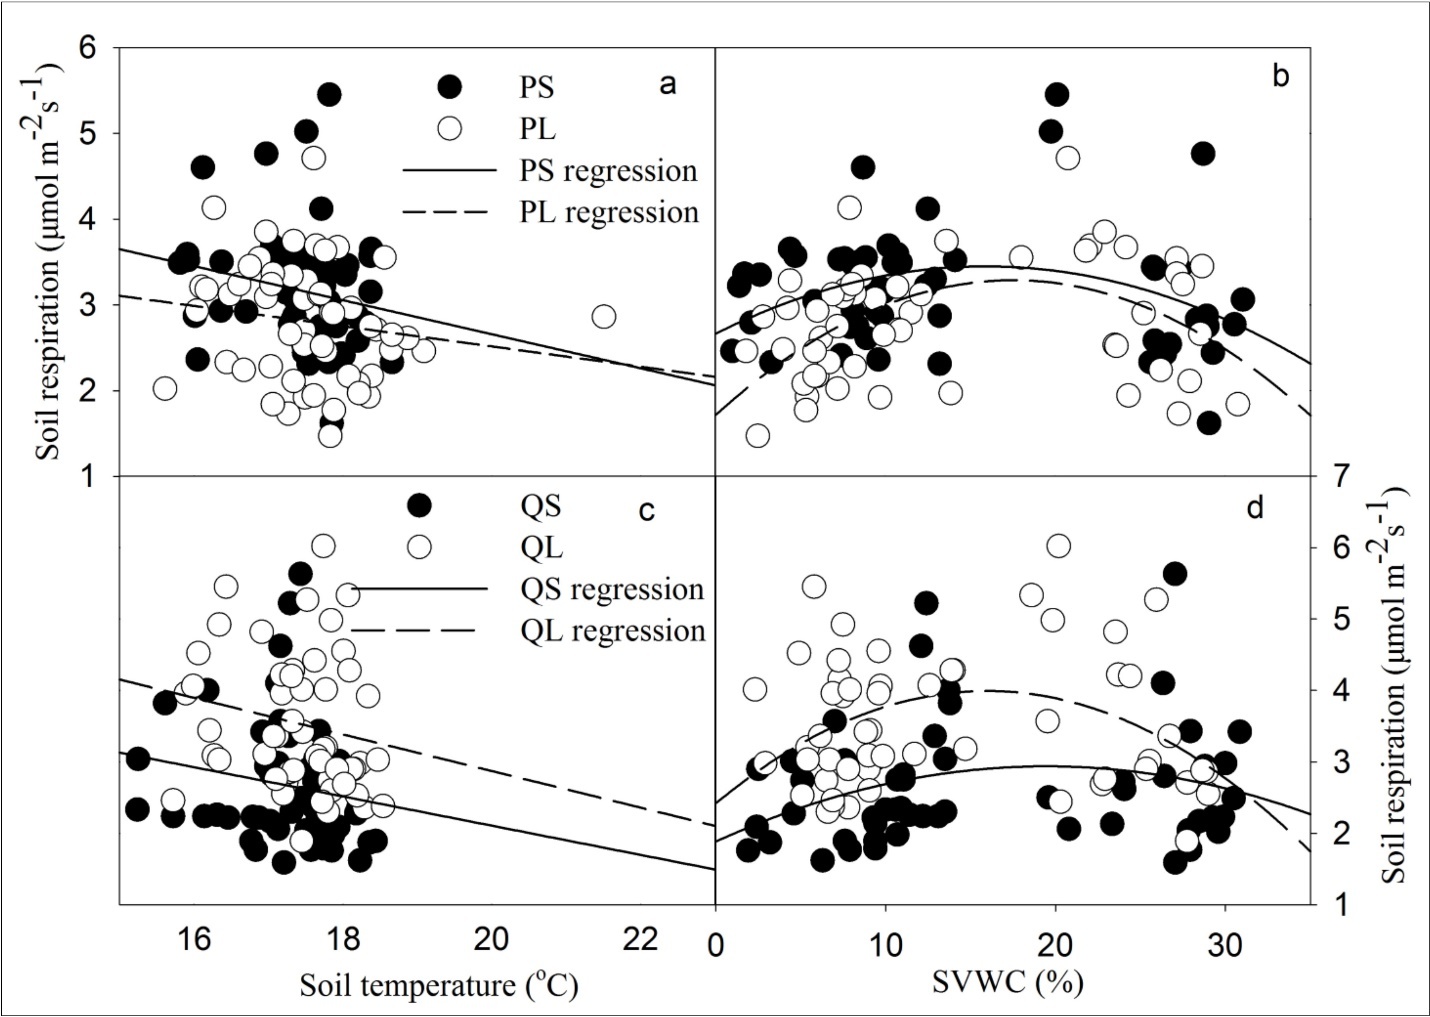  Soil respiration in relation to soil temperature at 10 cm and to soil volumetric water content (SVWC) at 5 cm for P. armandii (a and b) and Q. aliena (c and d). PS, PL, QS, and QL represent P. armandii with small and large size class, Q. aliena with small and large size class.